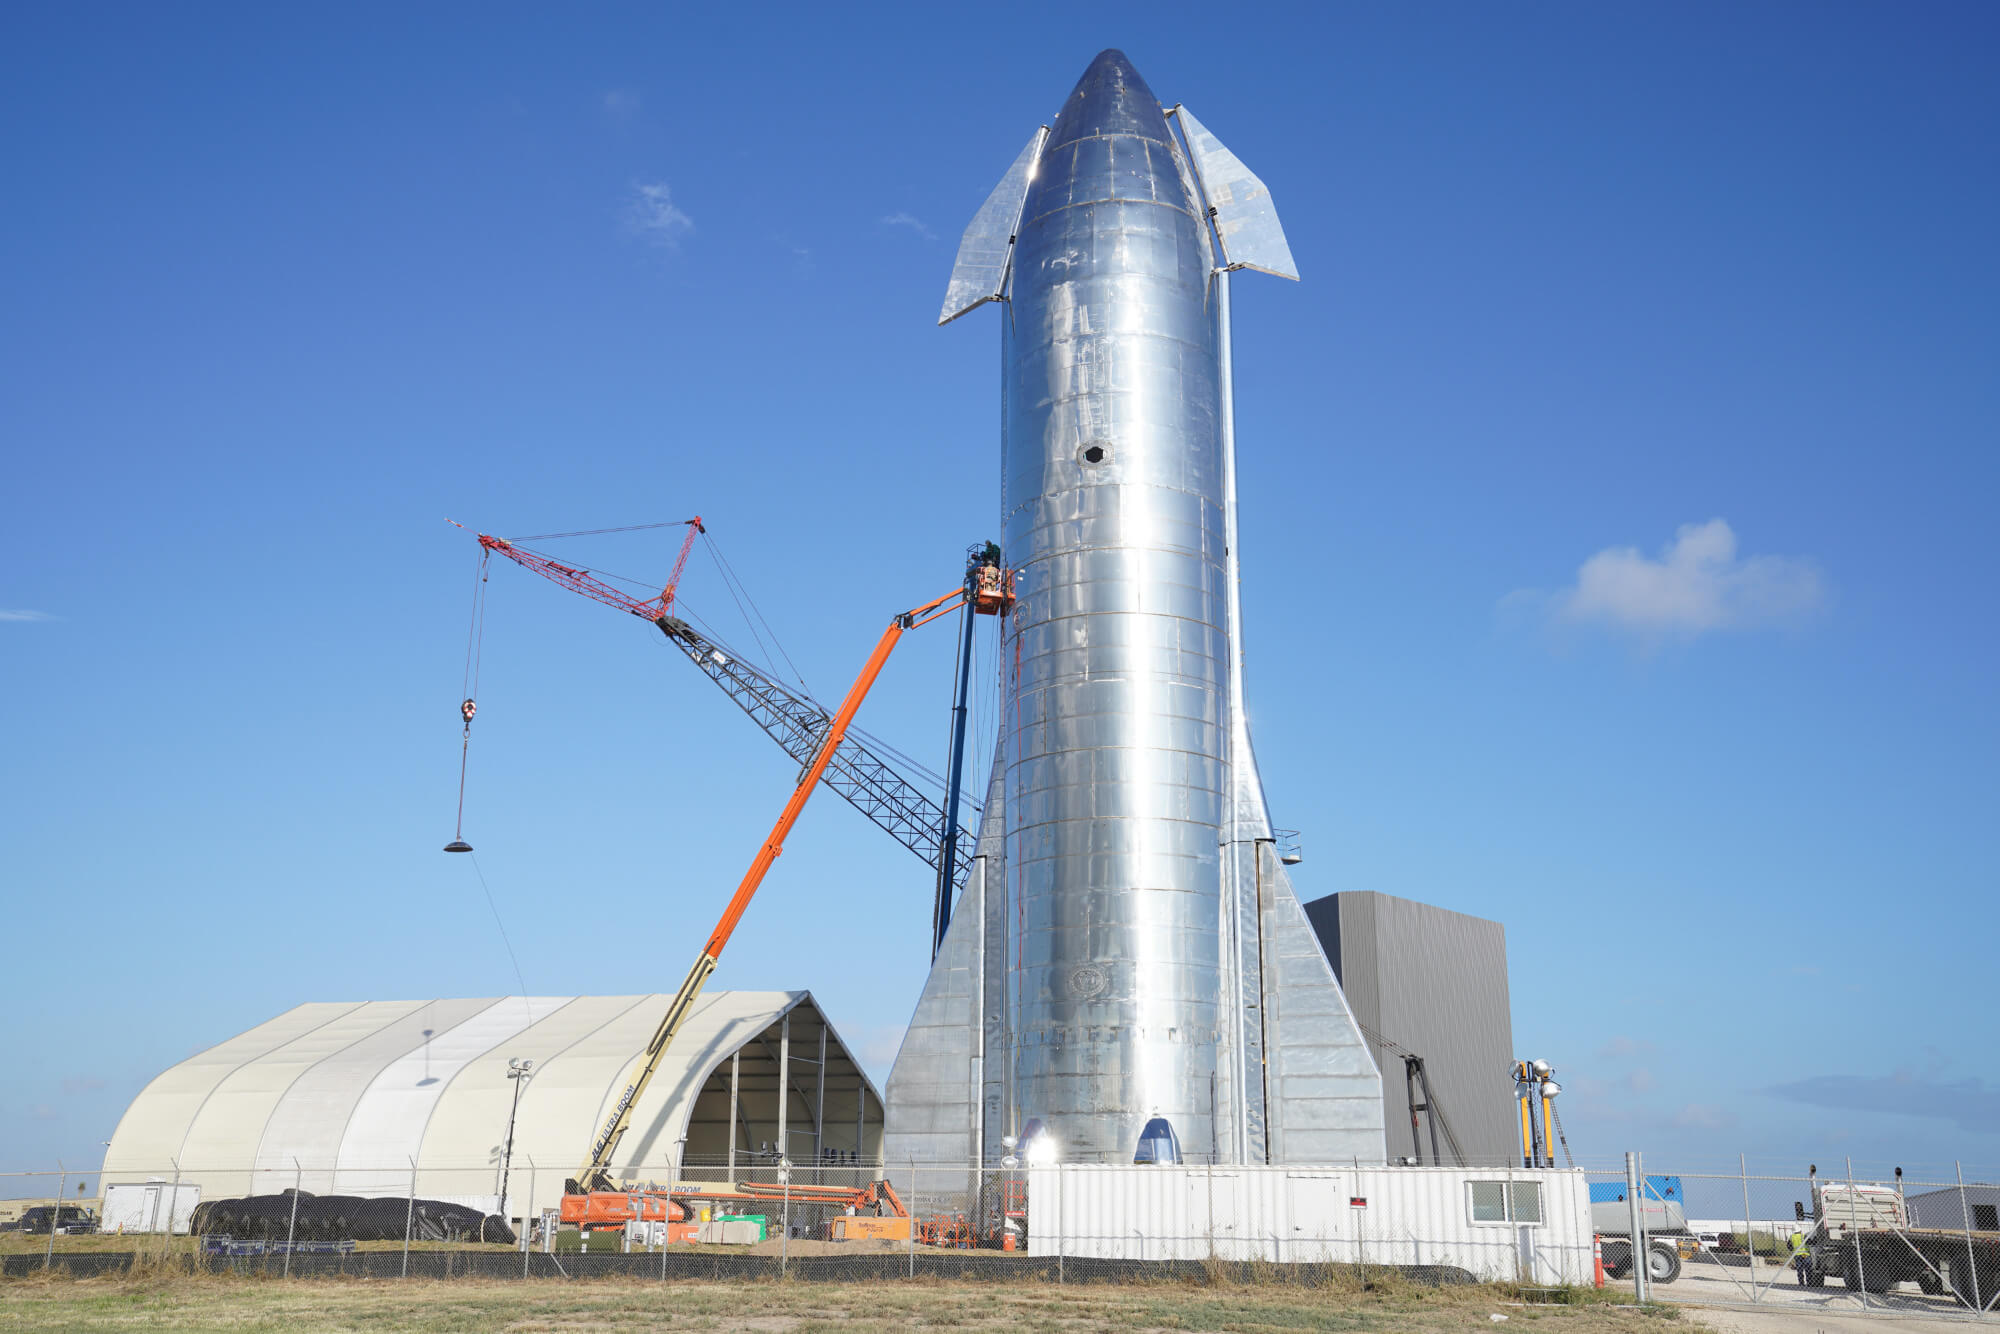 Elon Musk reveals SpaceX's stainless steel Starship rocket